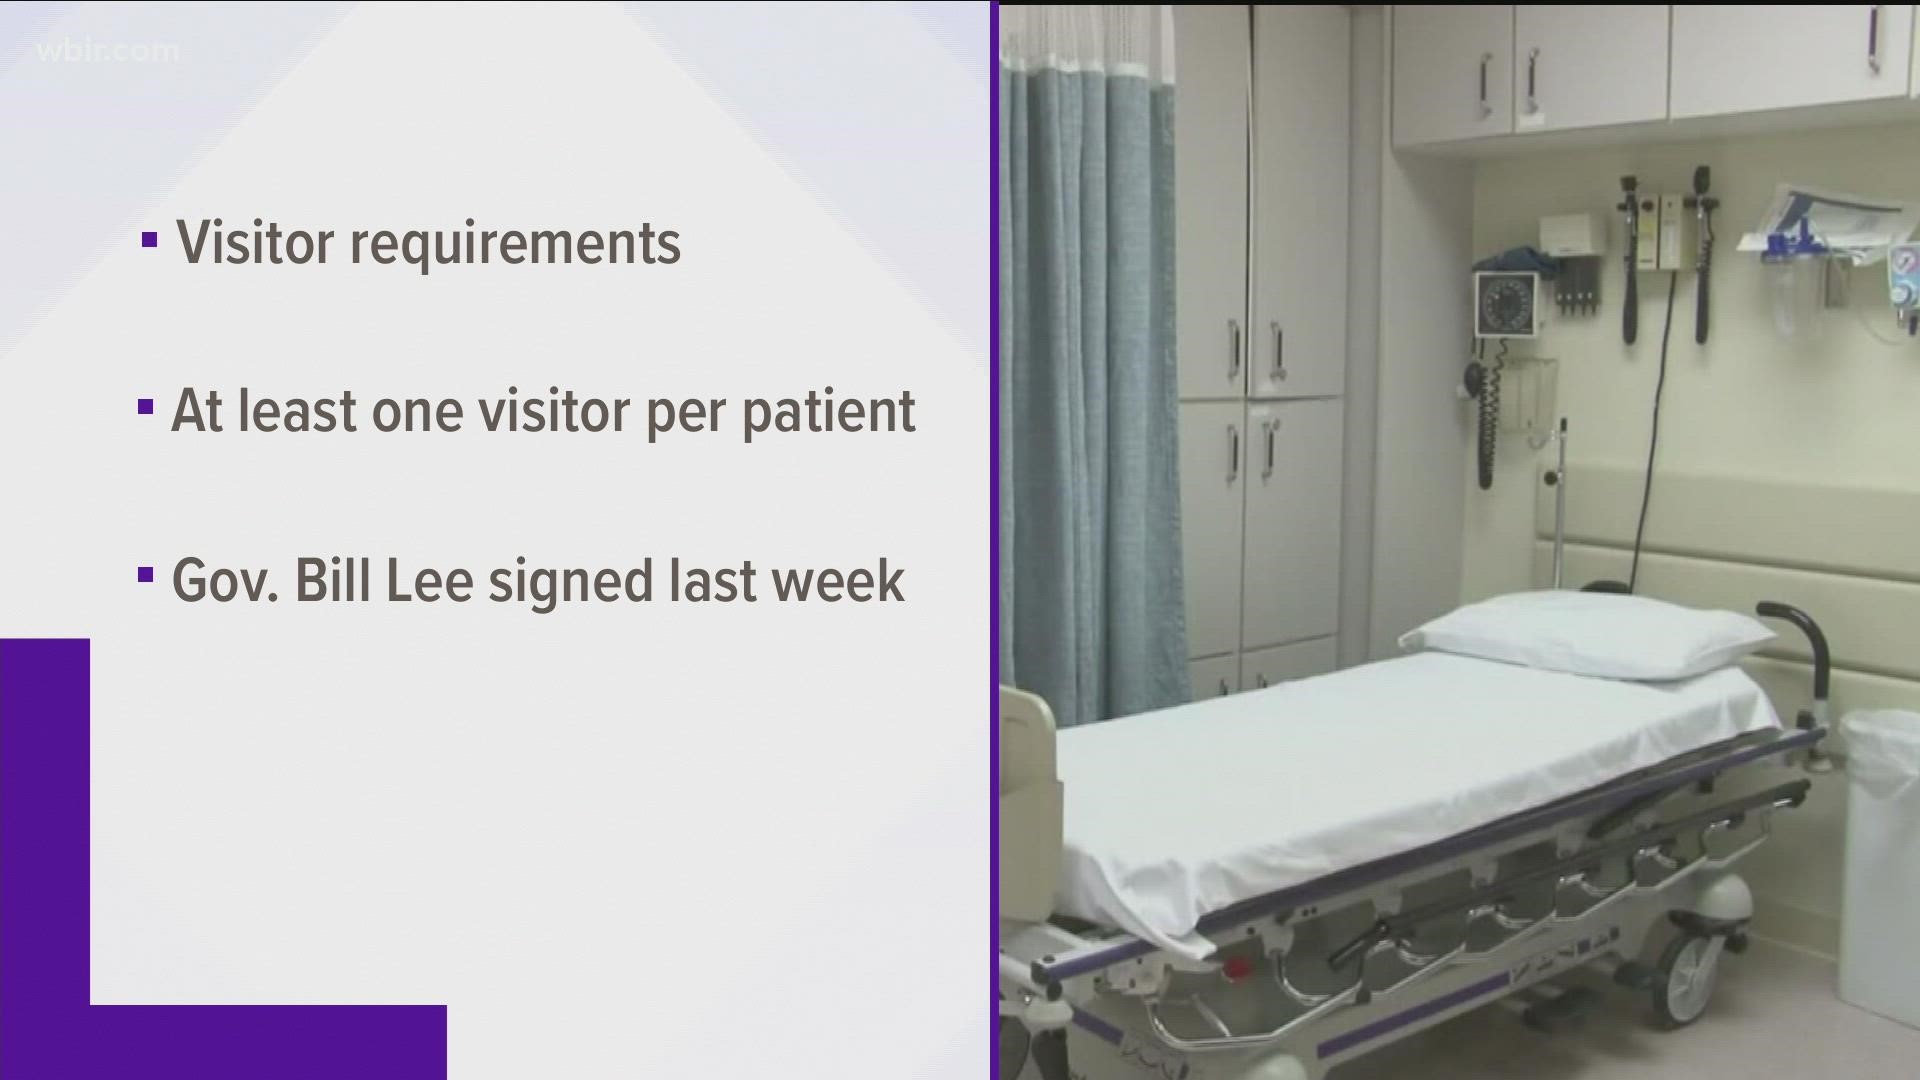 Part of the new law would prevent hospitals from restricting patients from having at least one visitor.